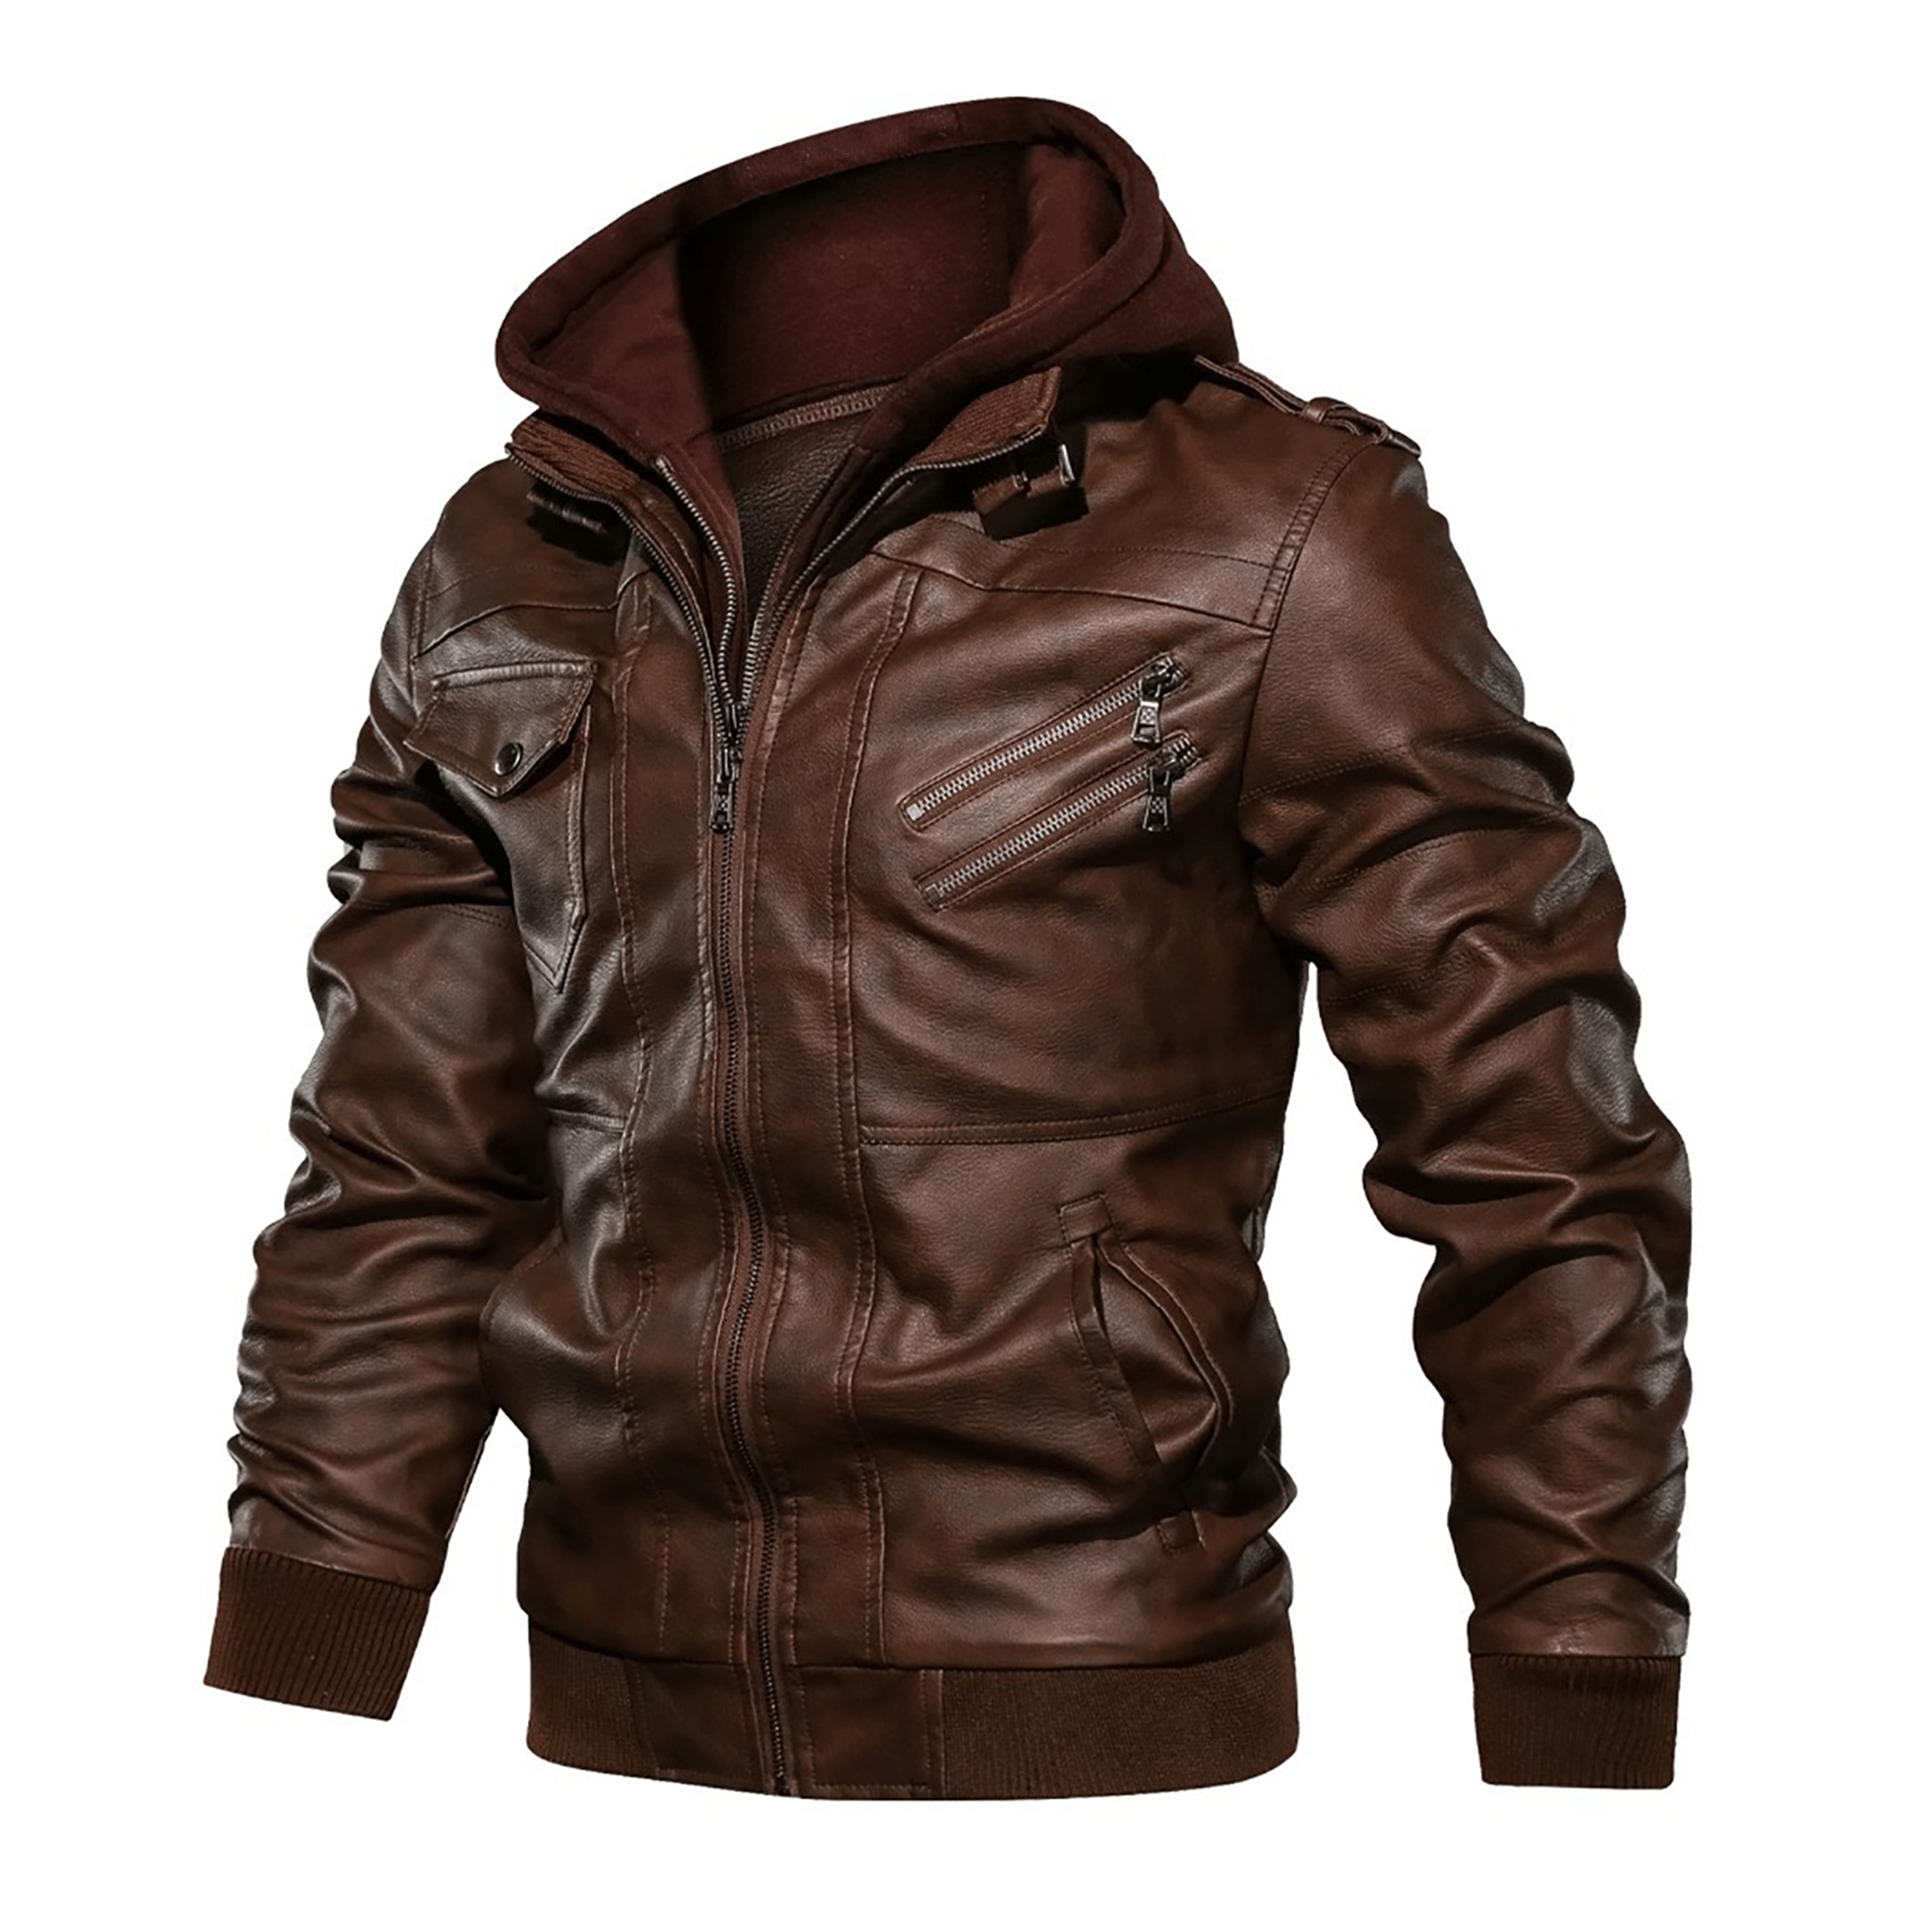 Top leather jackets and latest products 231